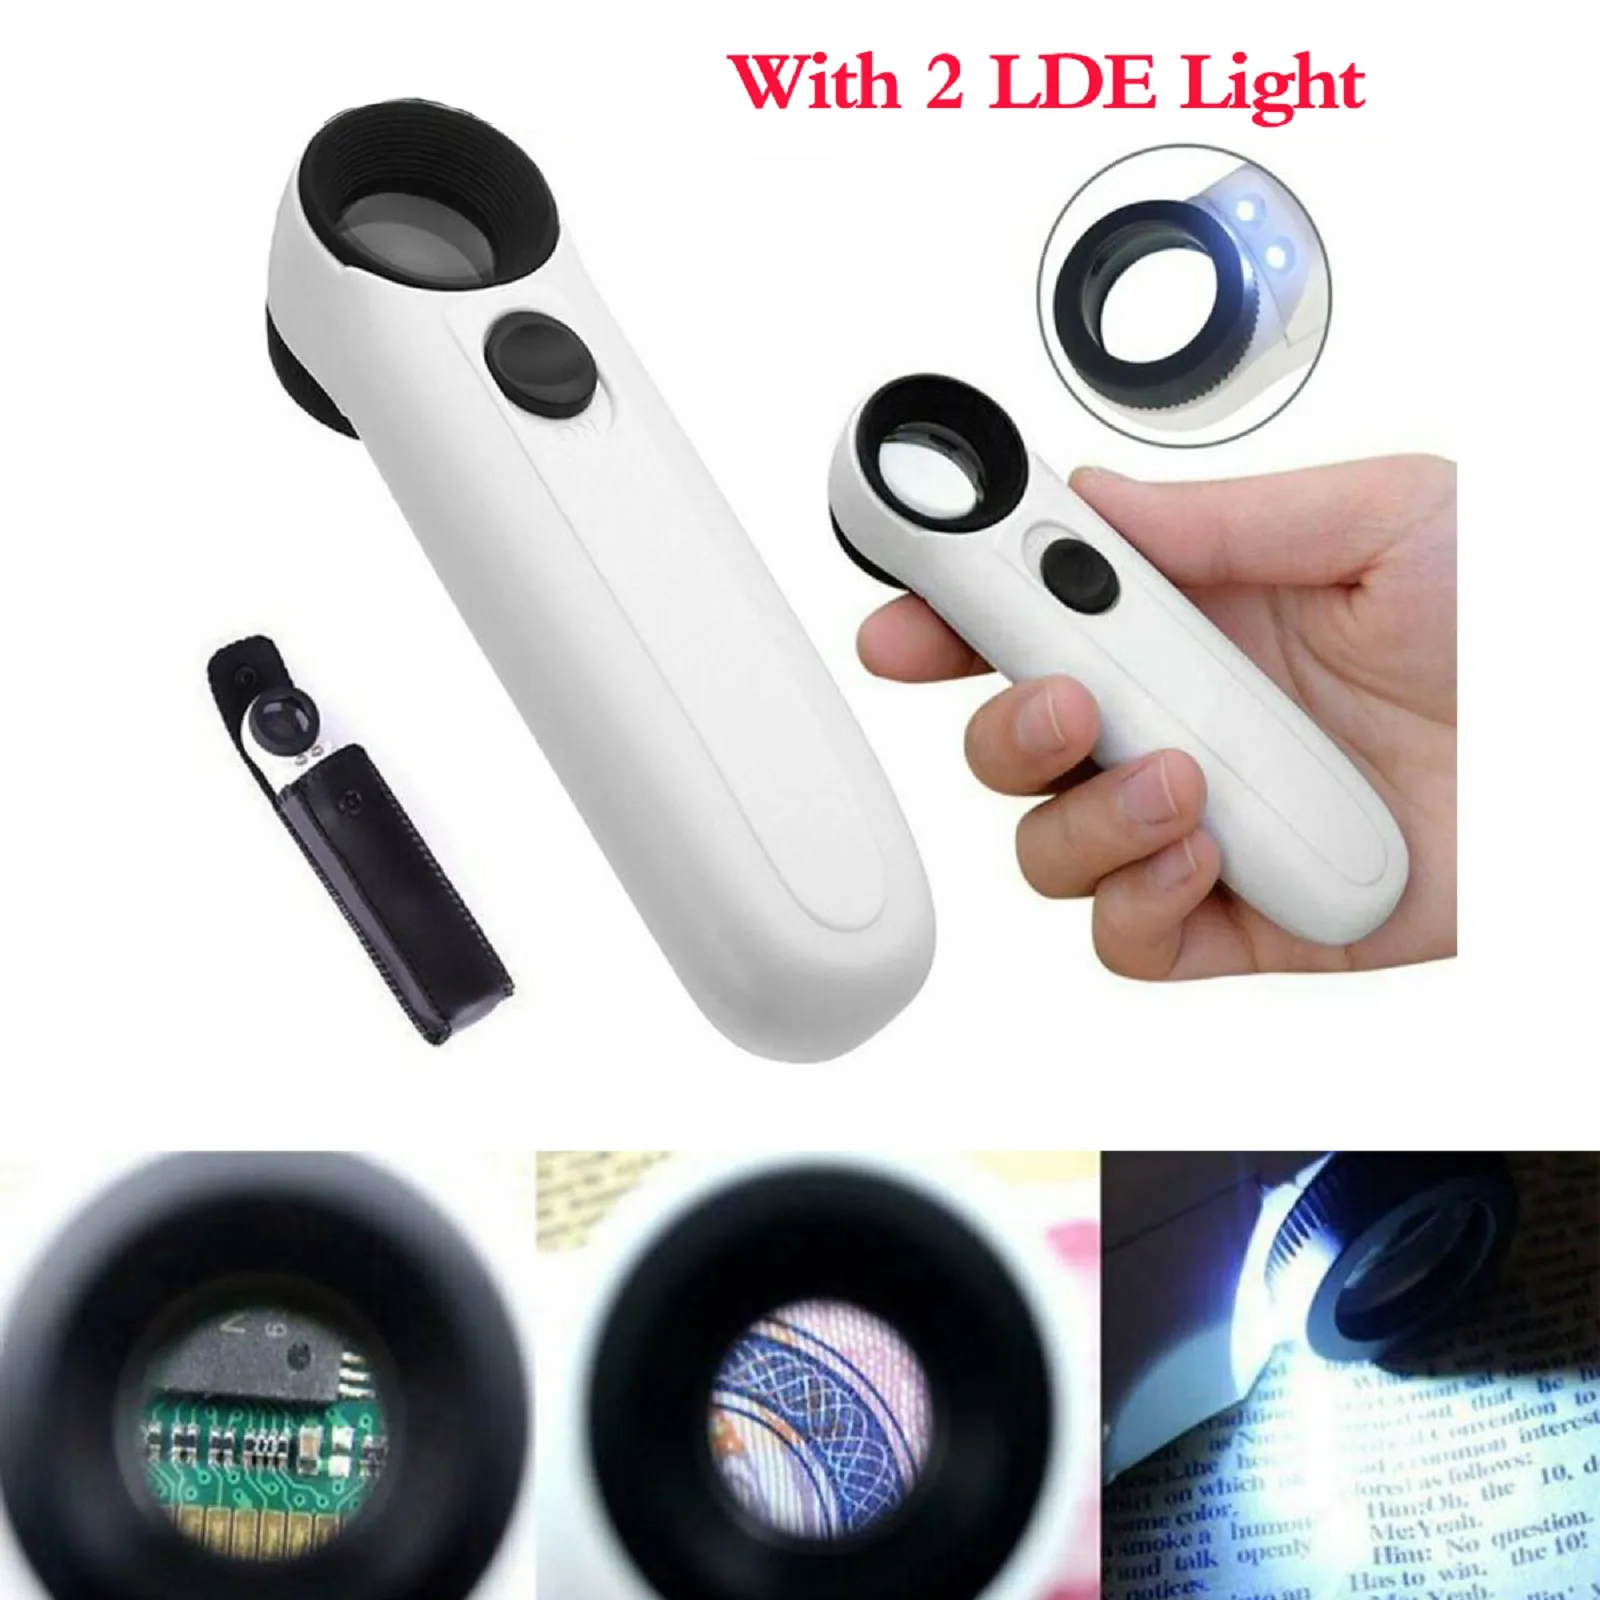 

Handheld On / Off 40X 3.5Mm Led Light Microscope Magnifier Magnifying Glass Loupe for Jewelry Circuit Boards Hallmarks